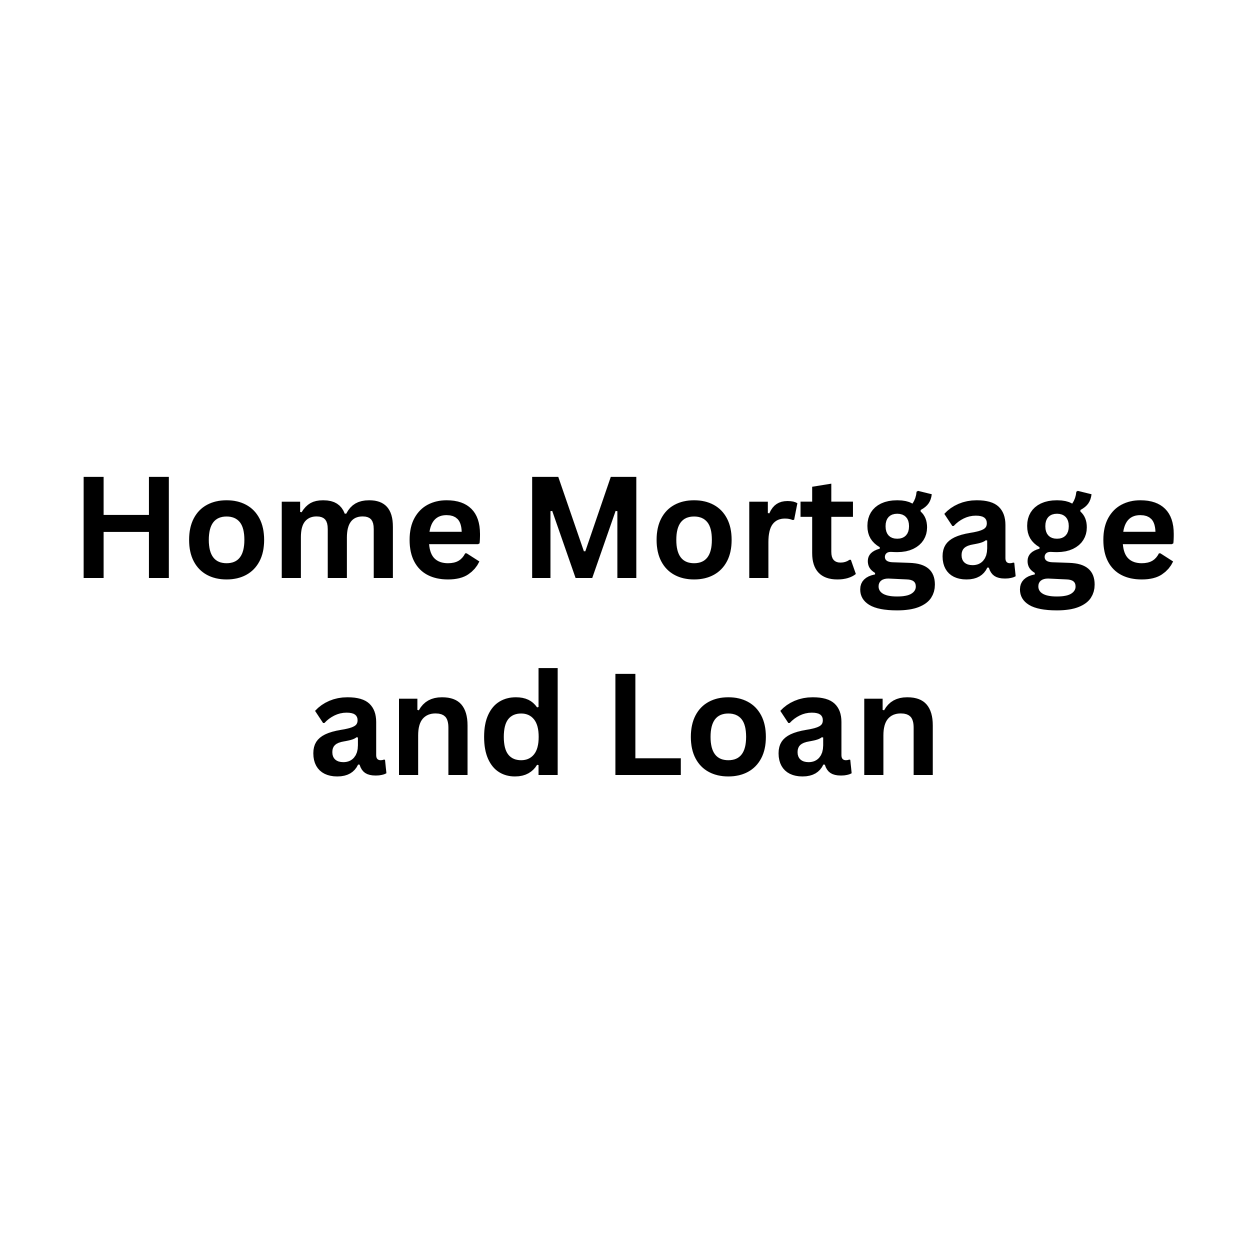 Home Mortgage and Loan